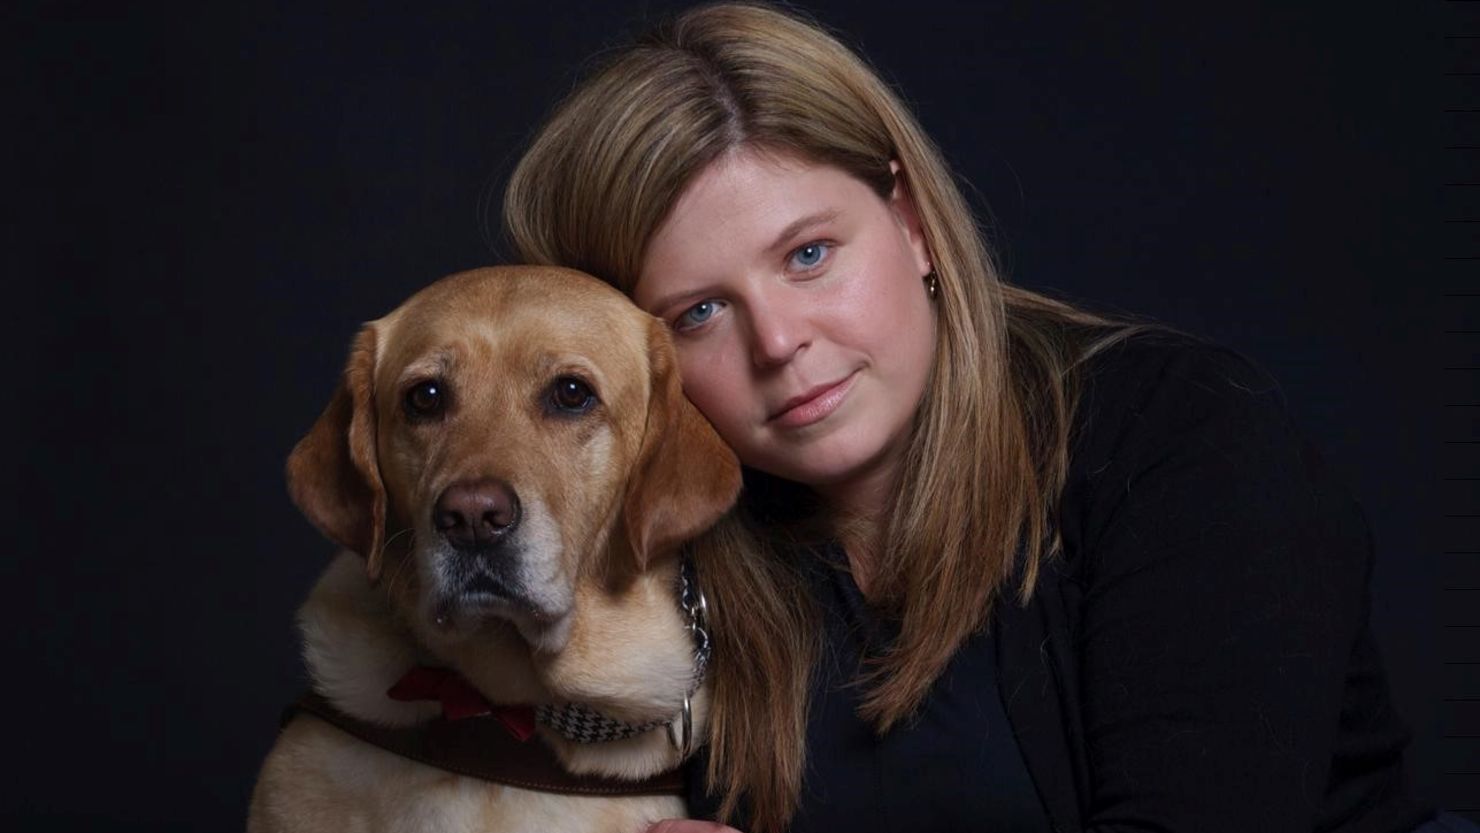 Trafficking survivor and advocate Margeaux Gray with her guide dog, Junebug.